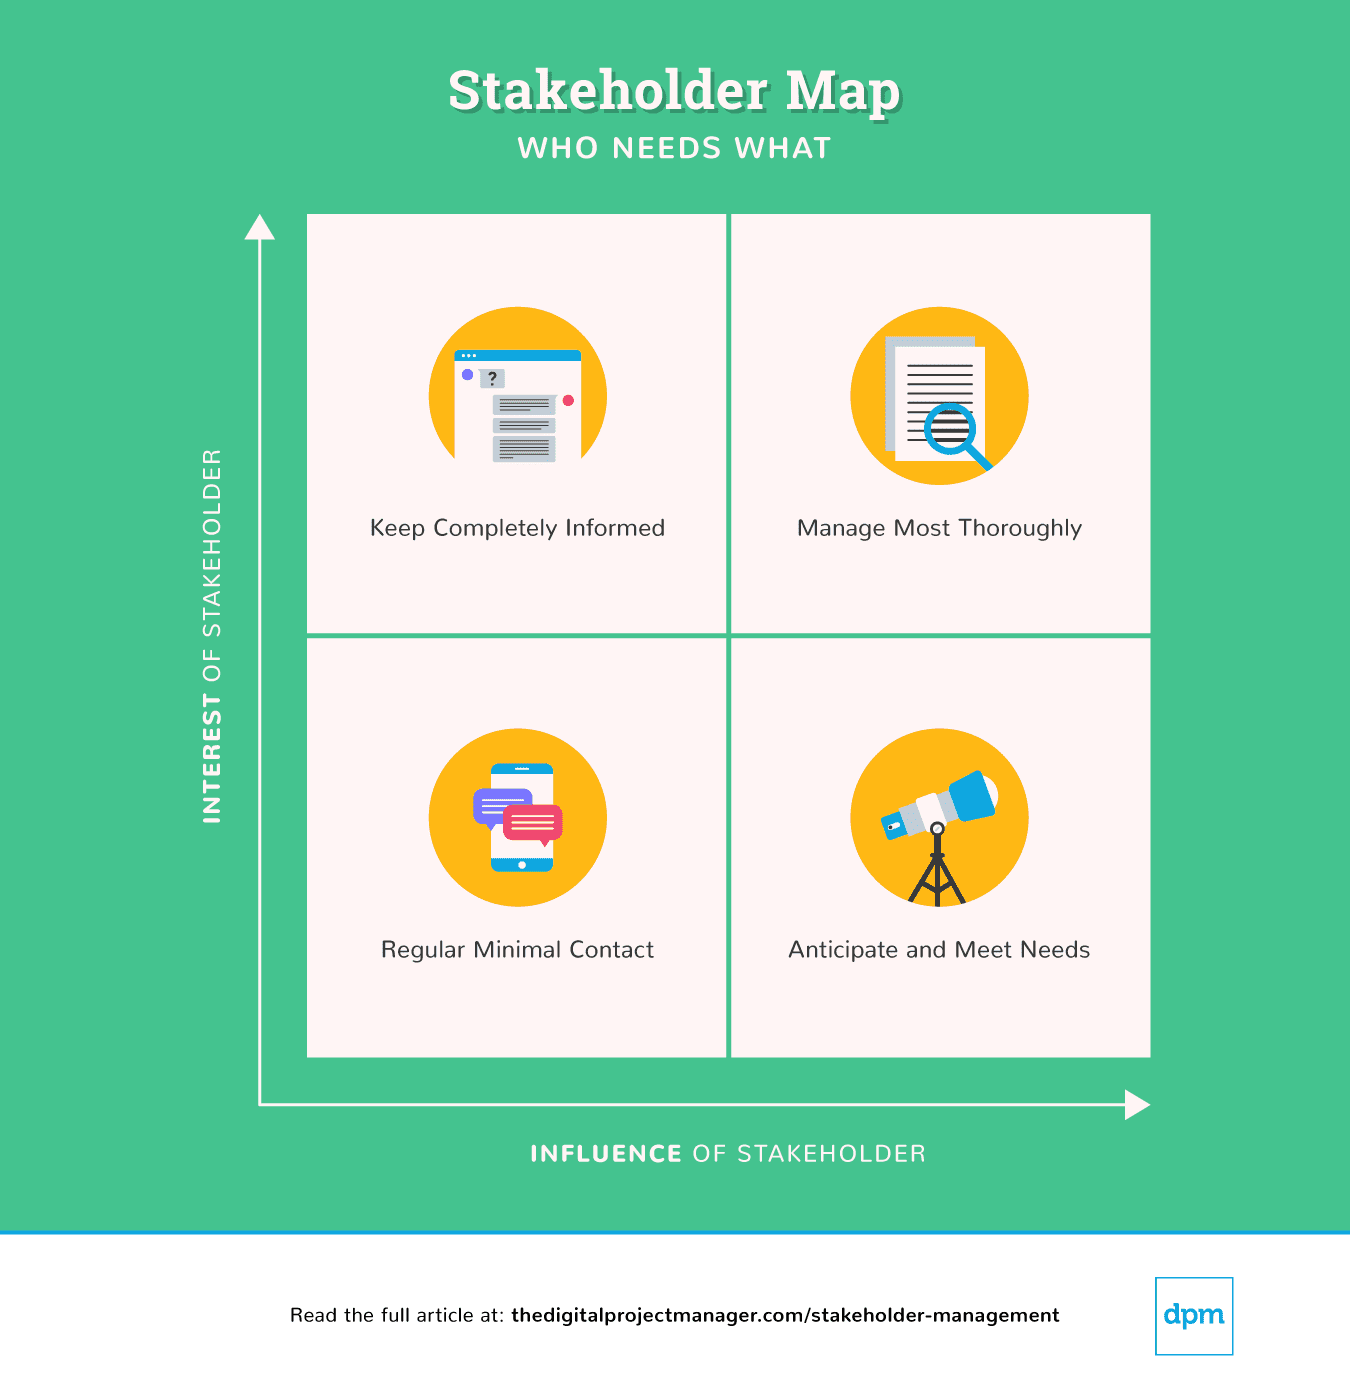 phd thesis on stakeholder management